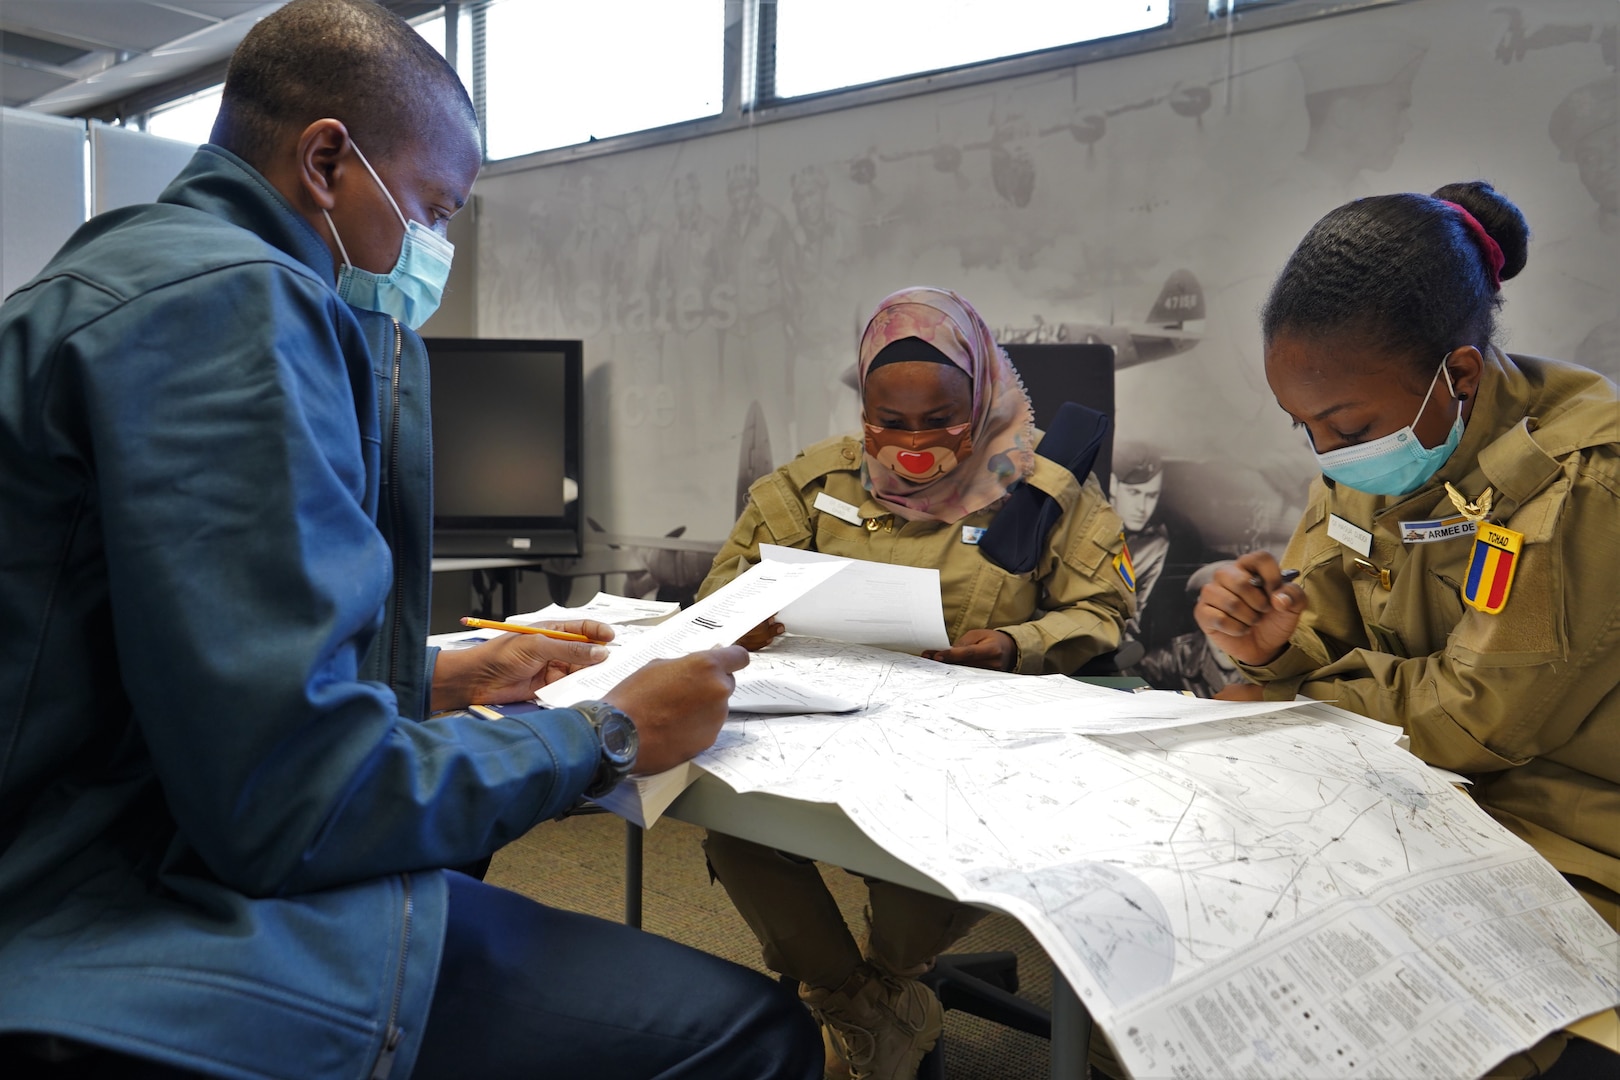 Three Chadian Air Force personnel are the first Defense Language Institute English Language Center students to take advantage of the newest curriculum at DLIELC. This curriculum, pairing the latest virtual reality and artificial intelligence technology, aims to familiarize international students with English communications during aviation scenarios.